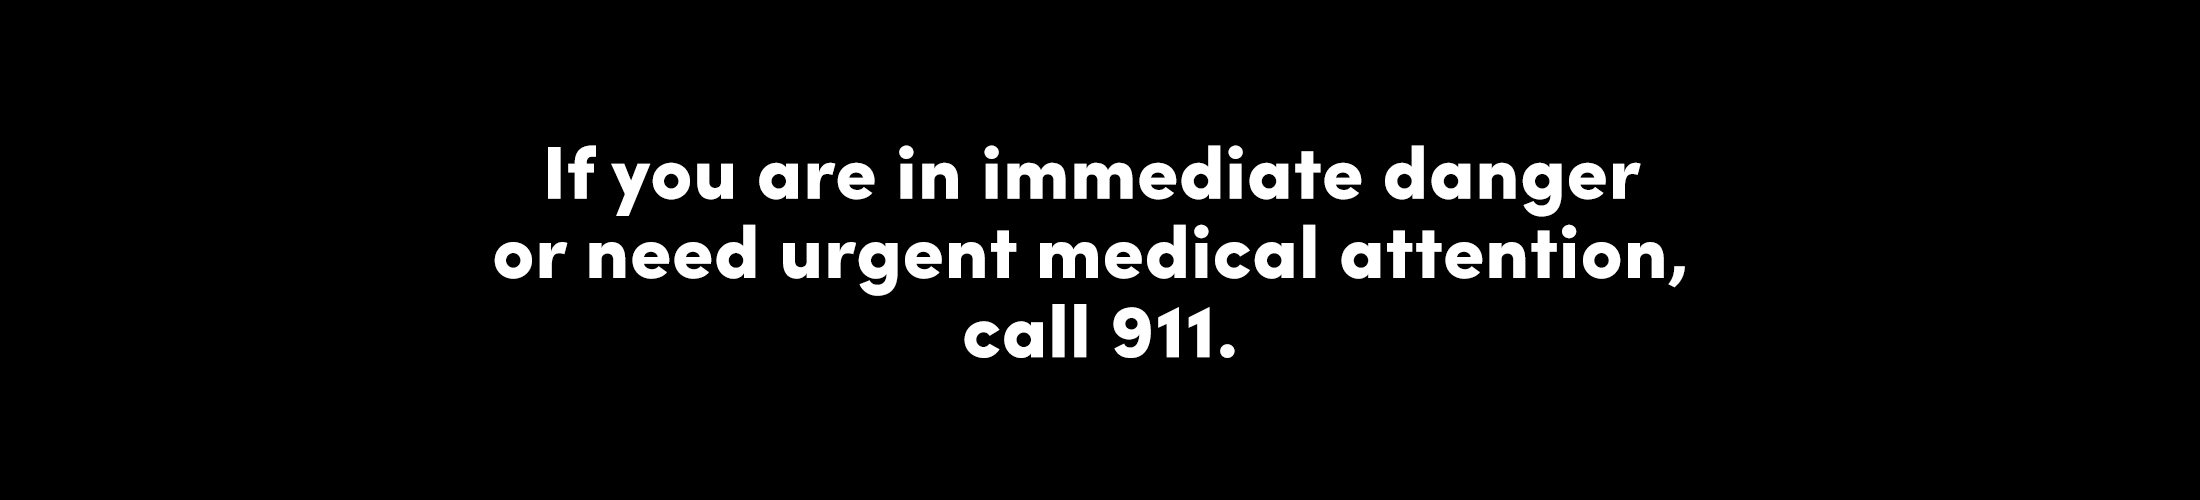 If you are in immediate danger or need urgent medical attention, call 911.